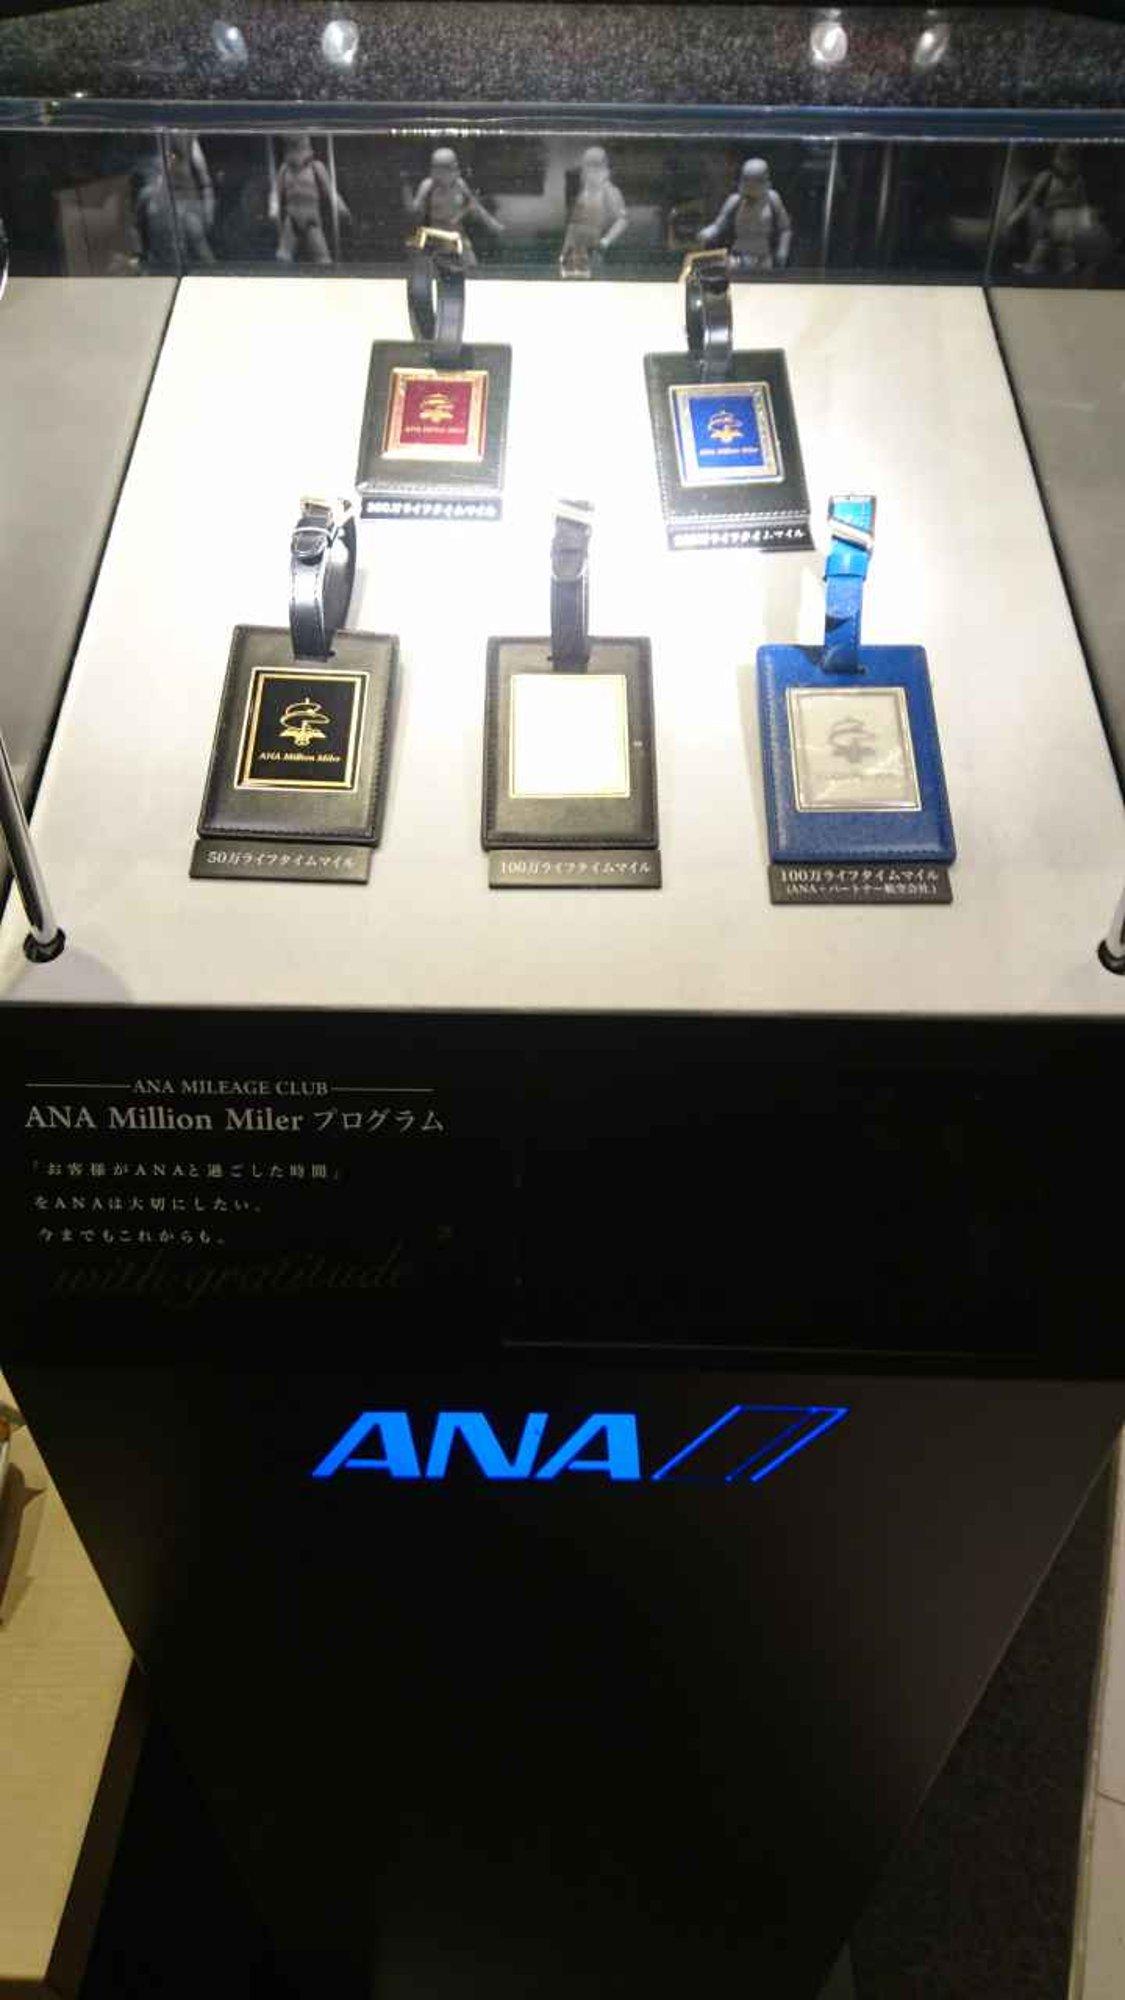 All Nippon Airways ANA Lounge (Gate 110) image 15 of 41